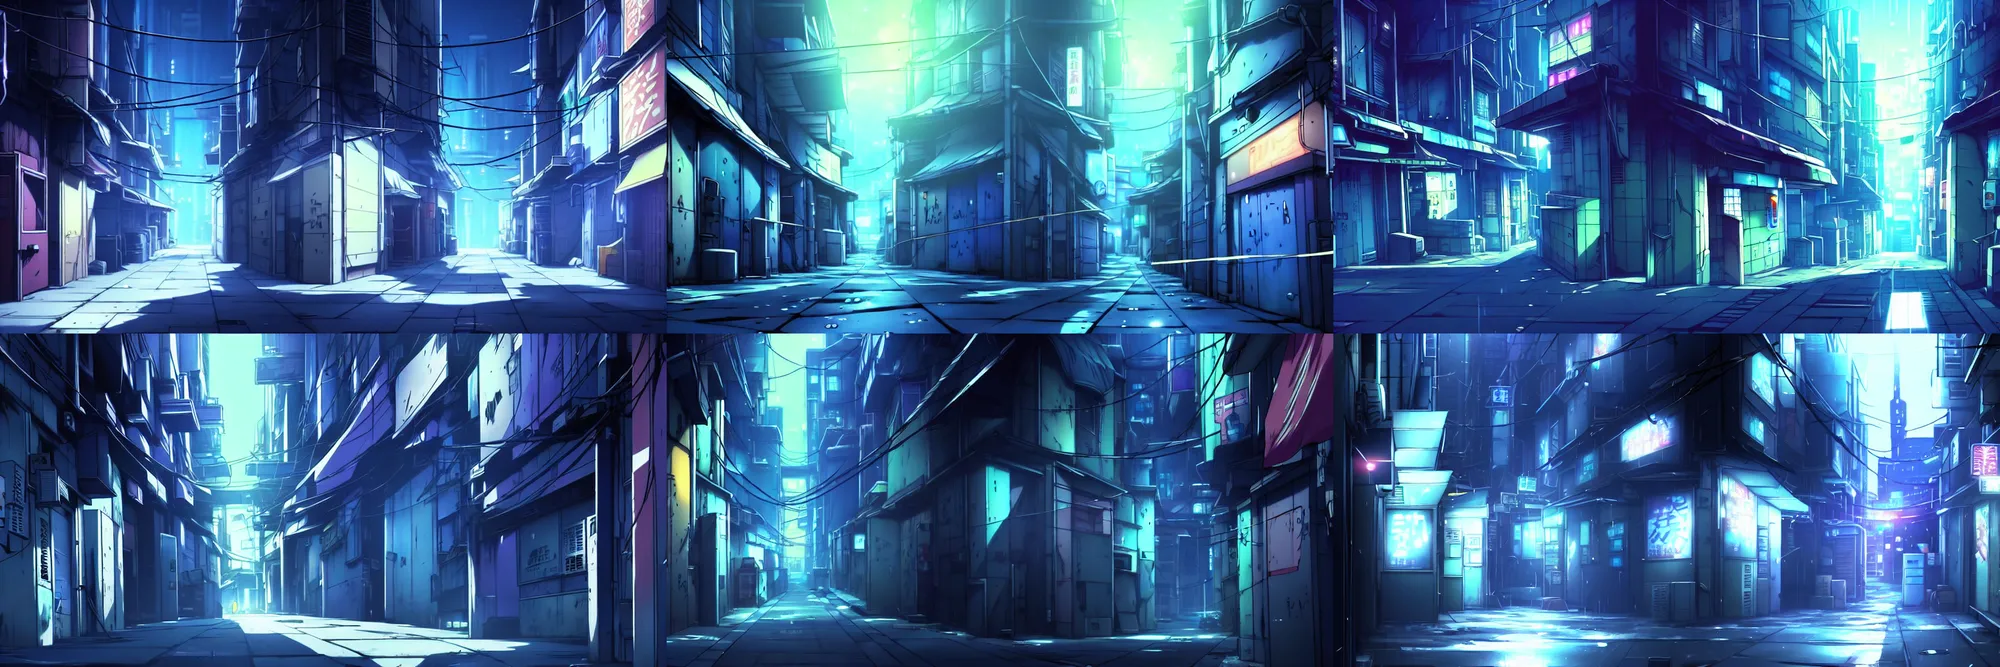 An Anime Alley At Night In Japan Background Get Cooler Hd Photography  Photo Background Image And Wallpaper for Free Download